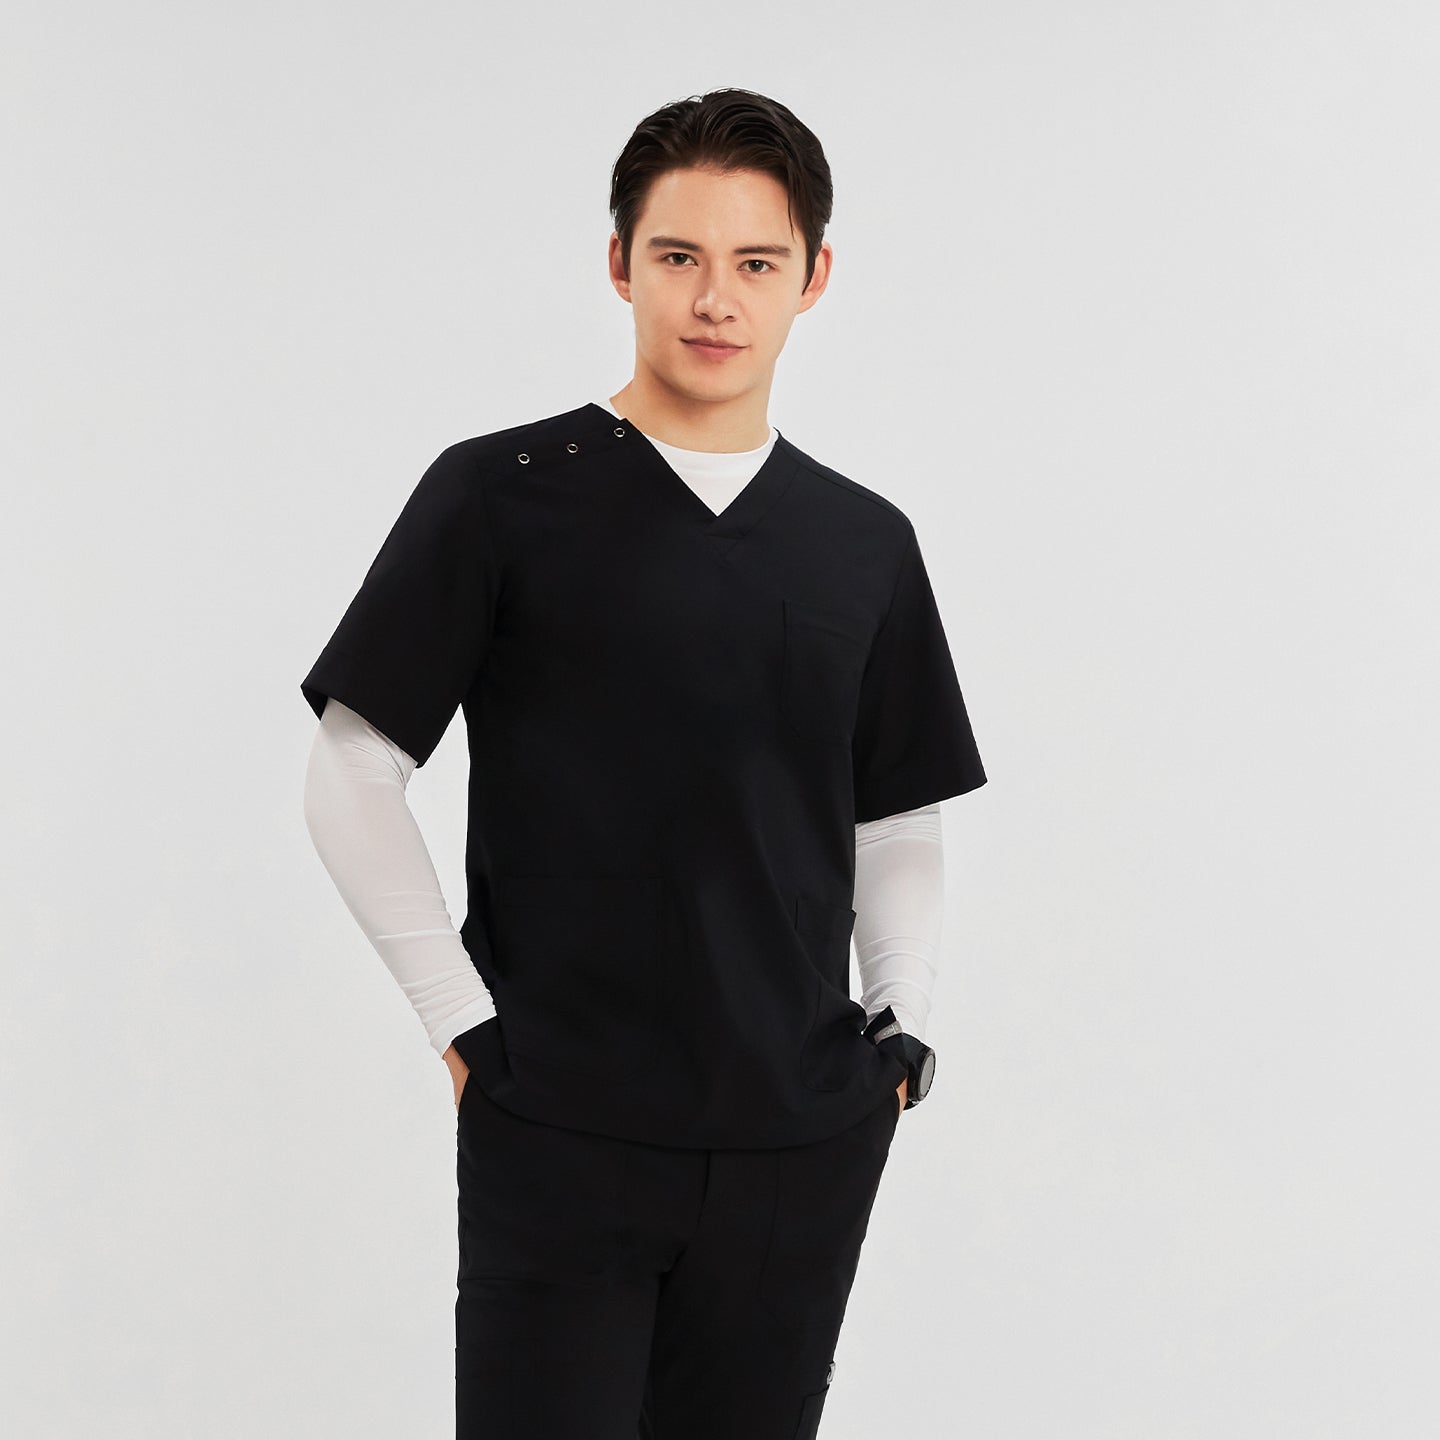  A man wearing a short-sleeved, V-neck scrub top with three buttons on the shoulder, white long sleeves underneath, and matching pants,Black